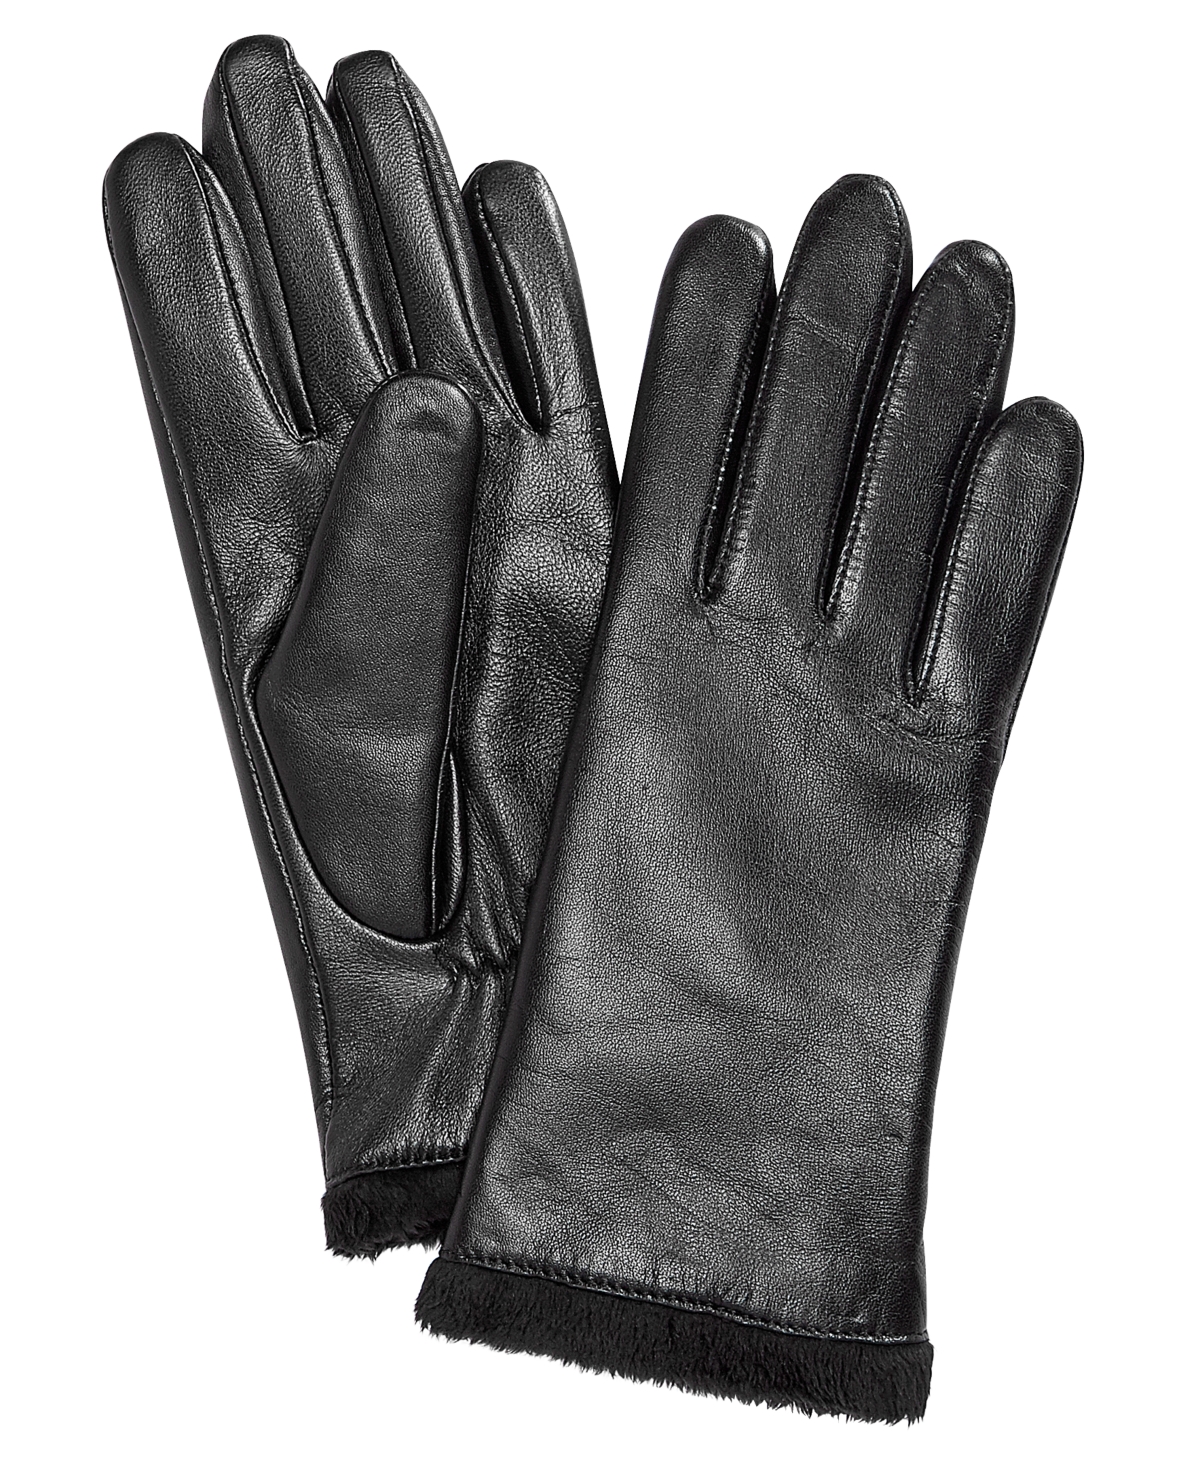 Micro Faux Fur Lined Leather Tech Gloves, Created for Macy's - Black